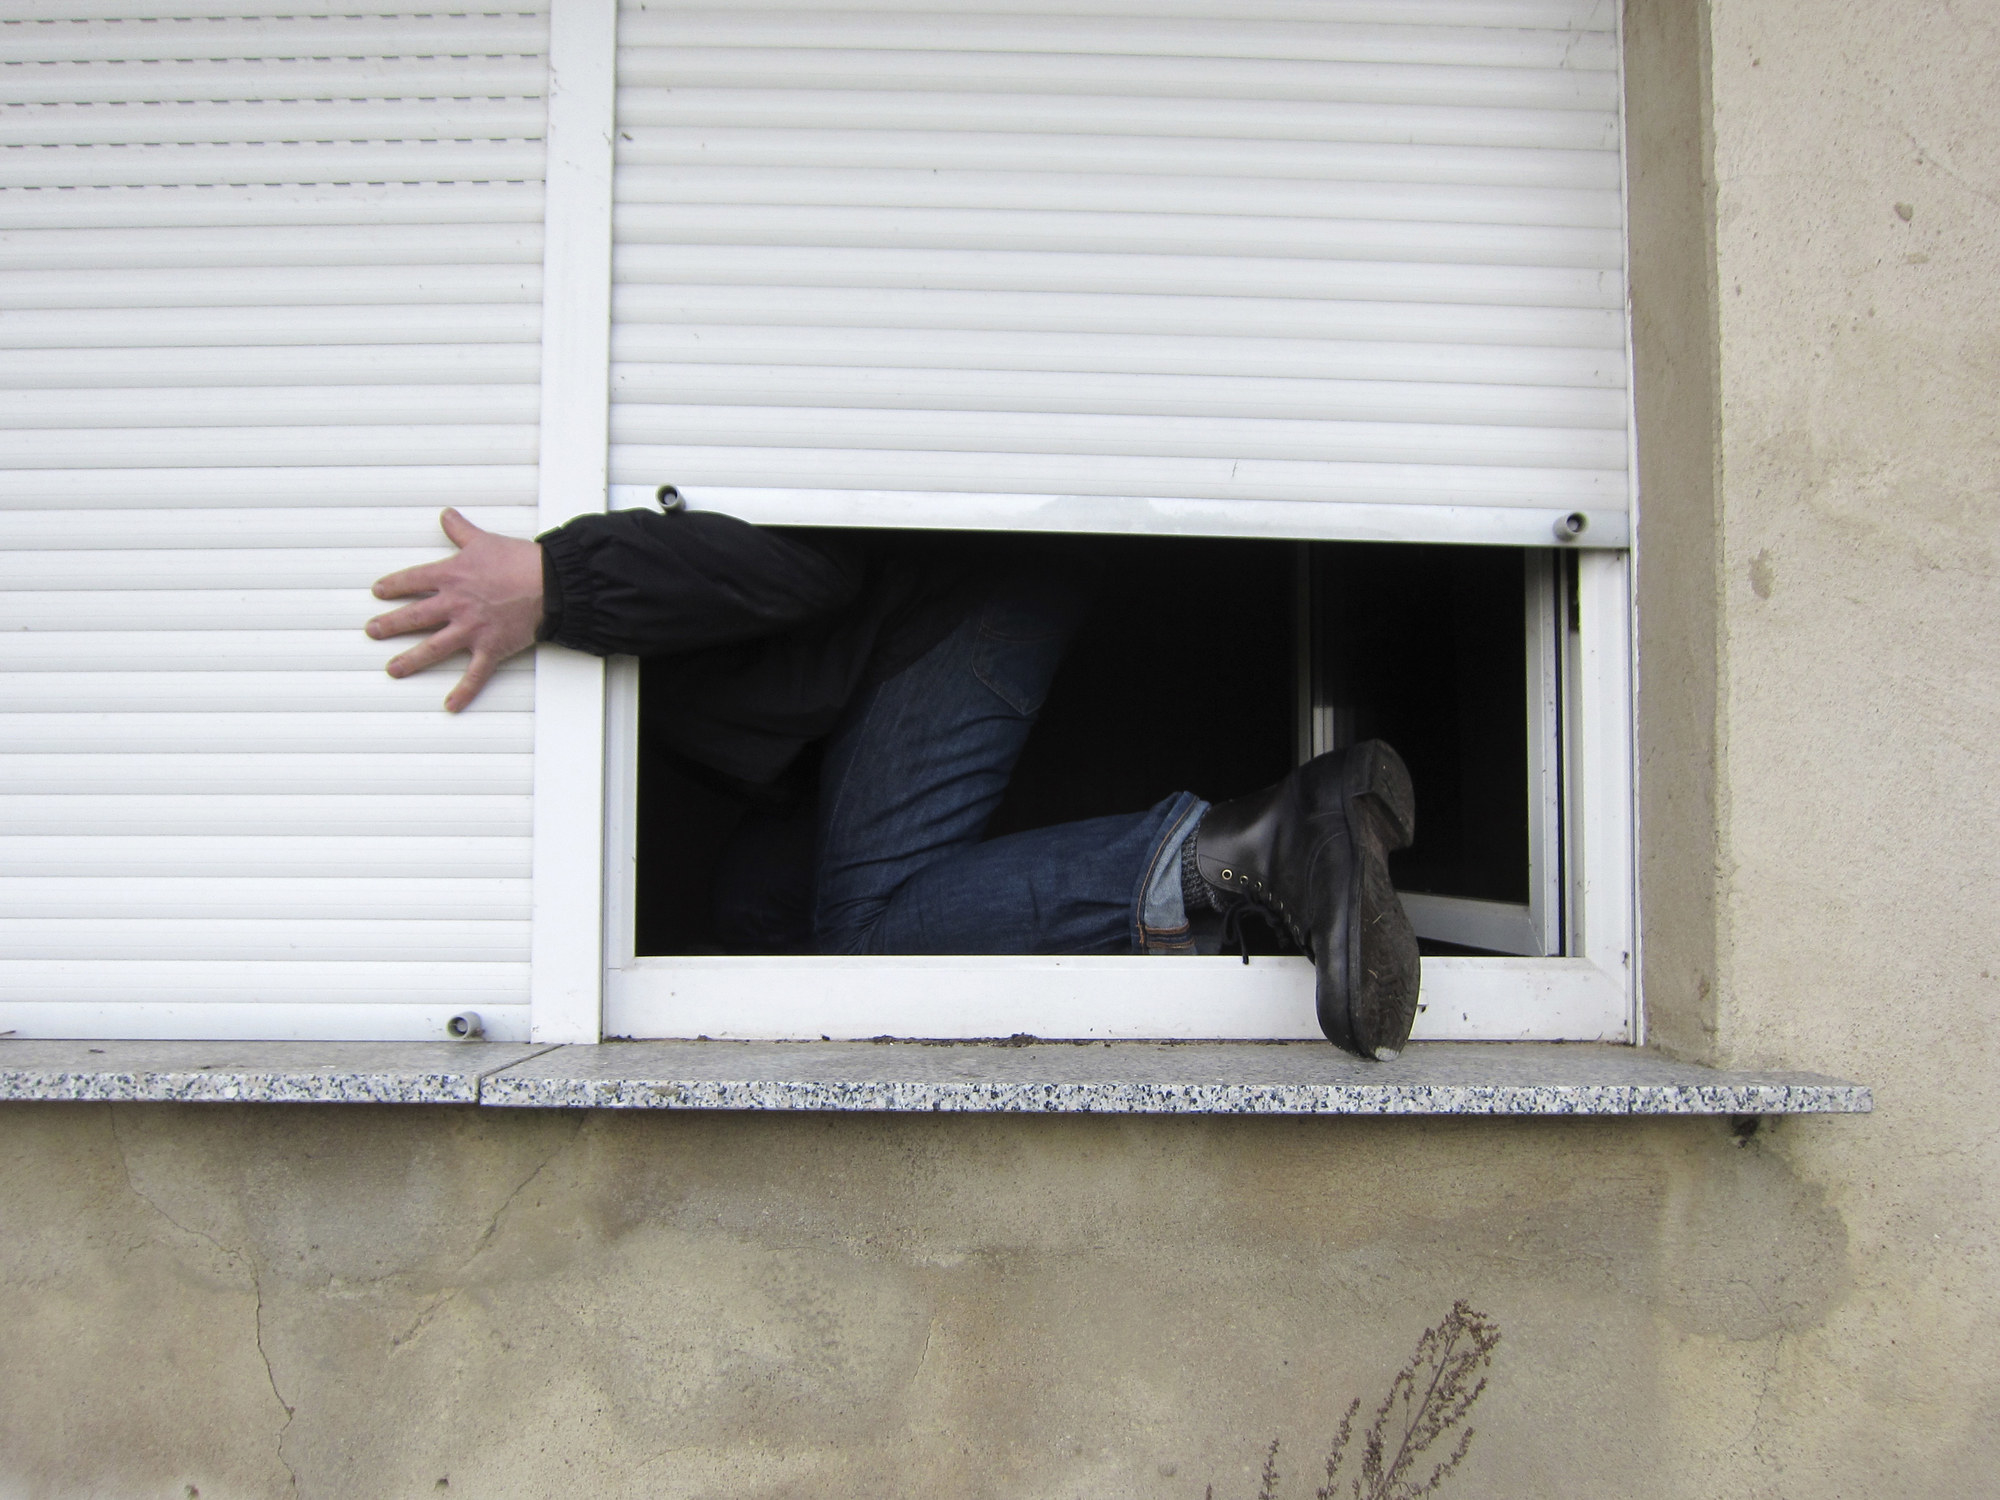 person sneaking out window